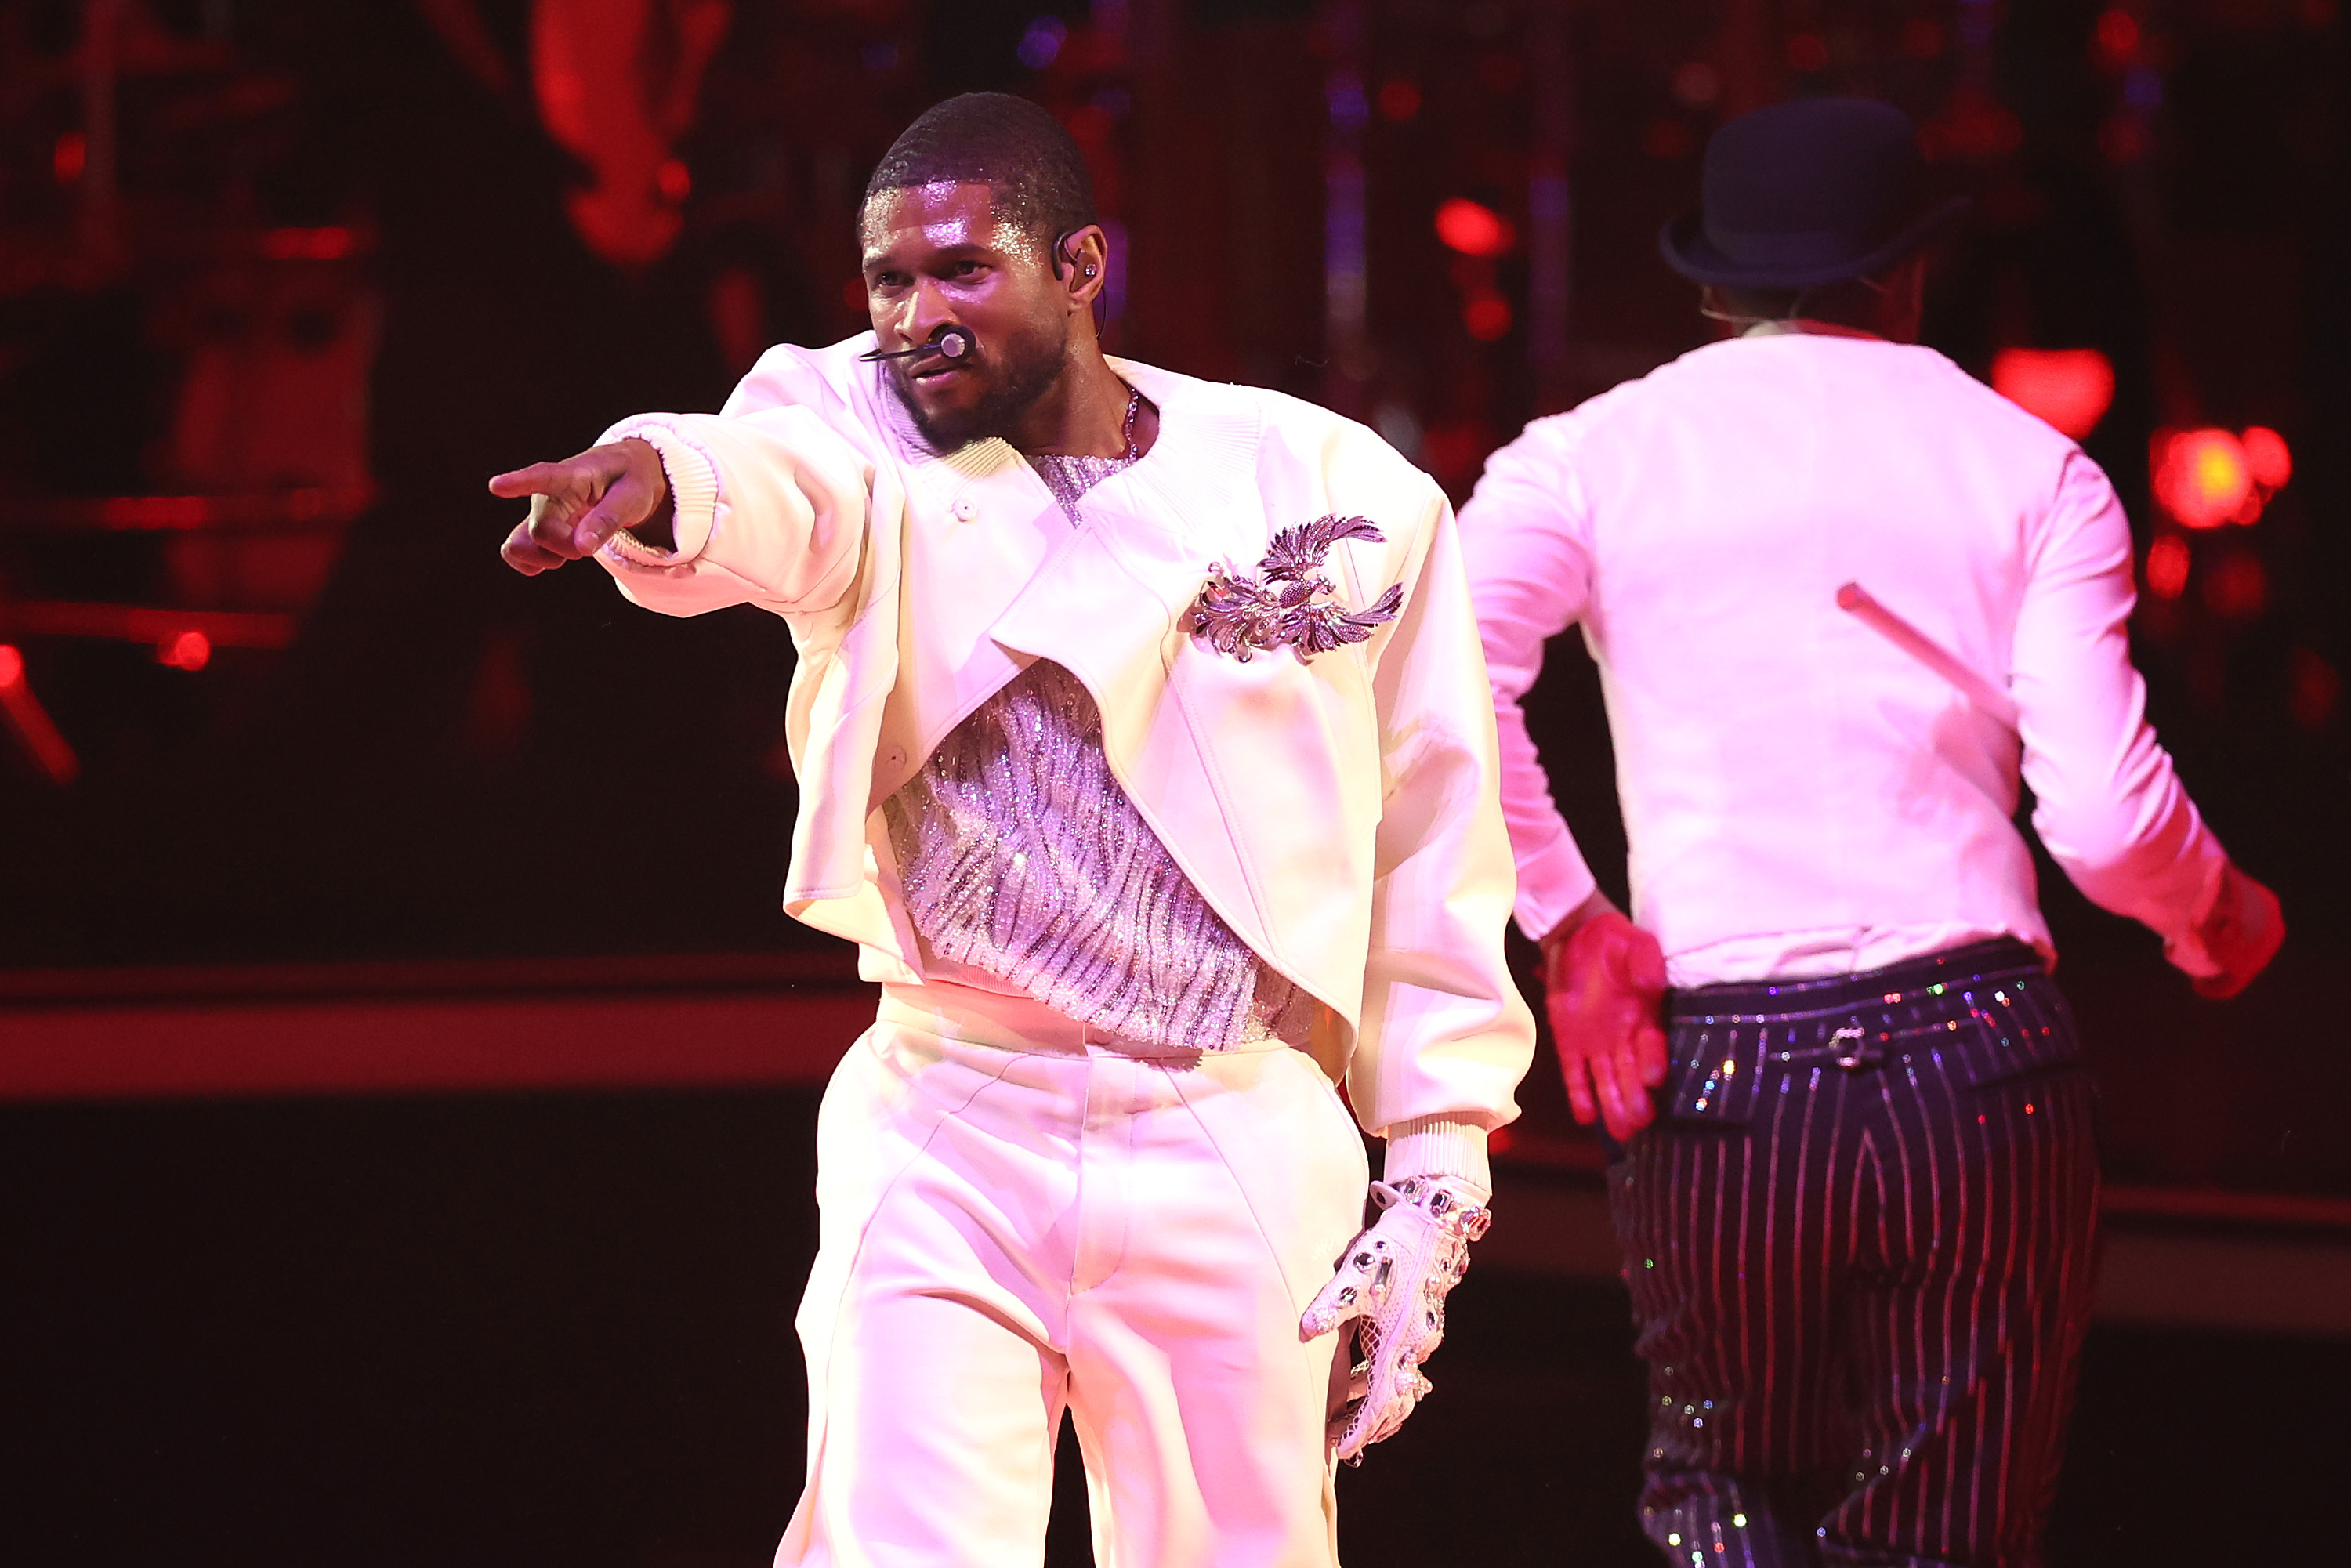 'Usher almost fell and took them skates off fast,' one fan said